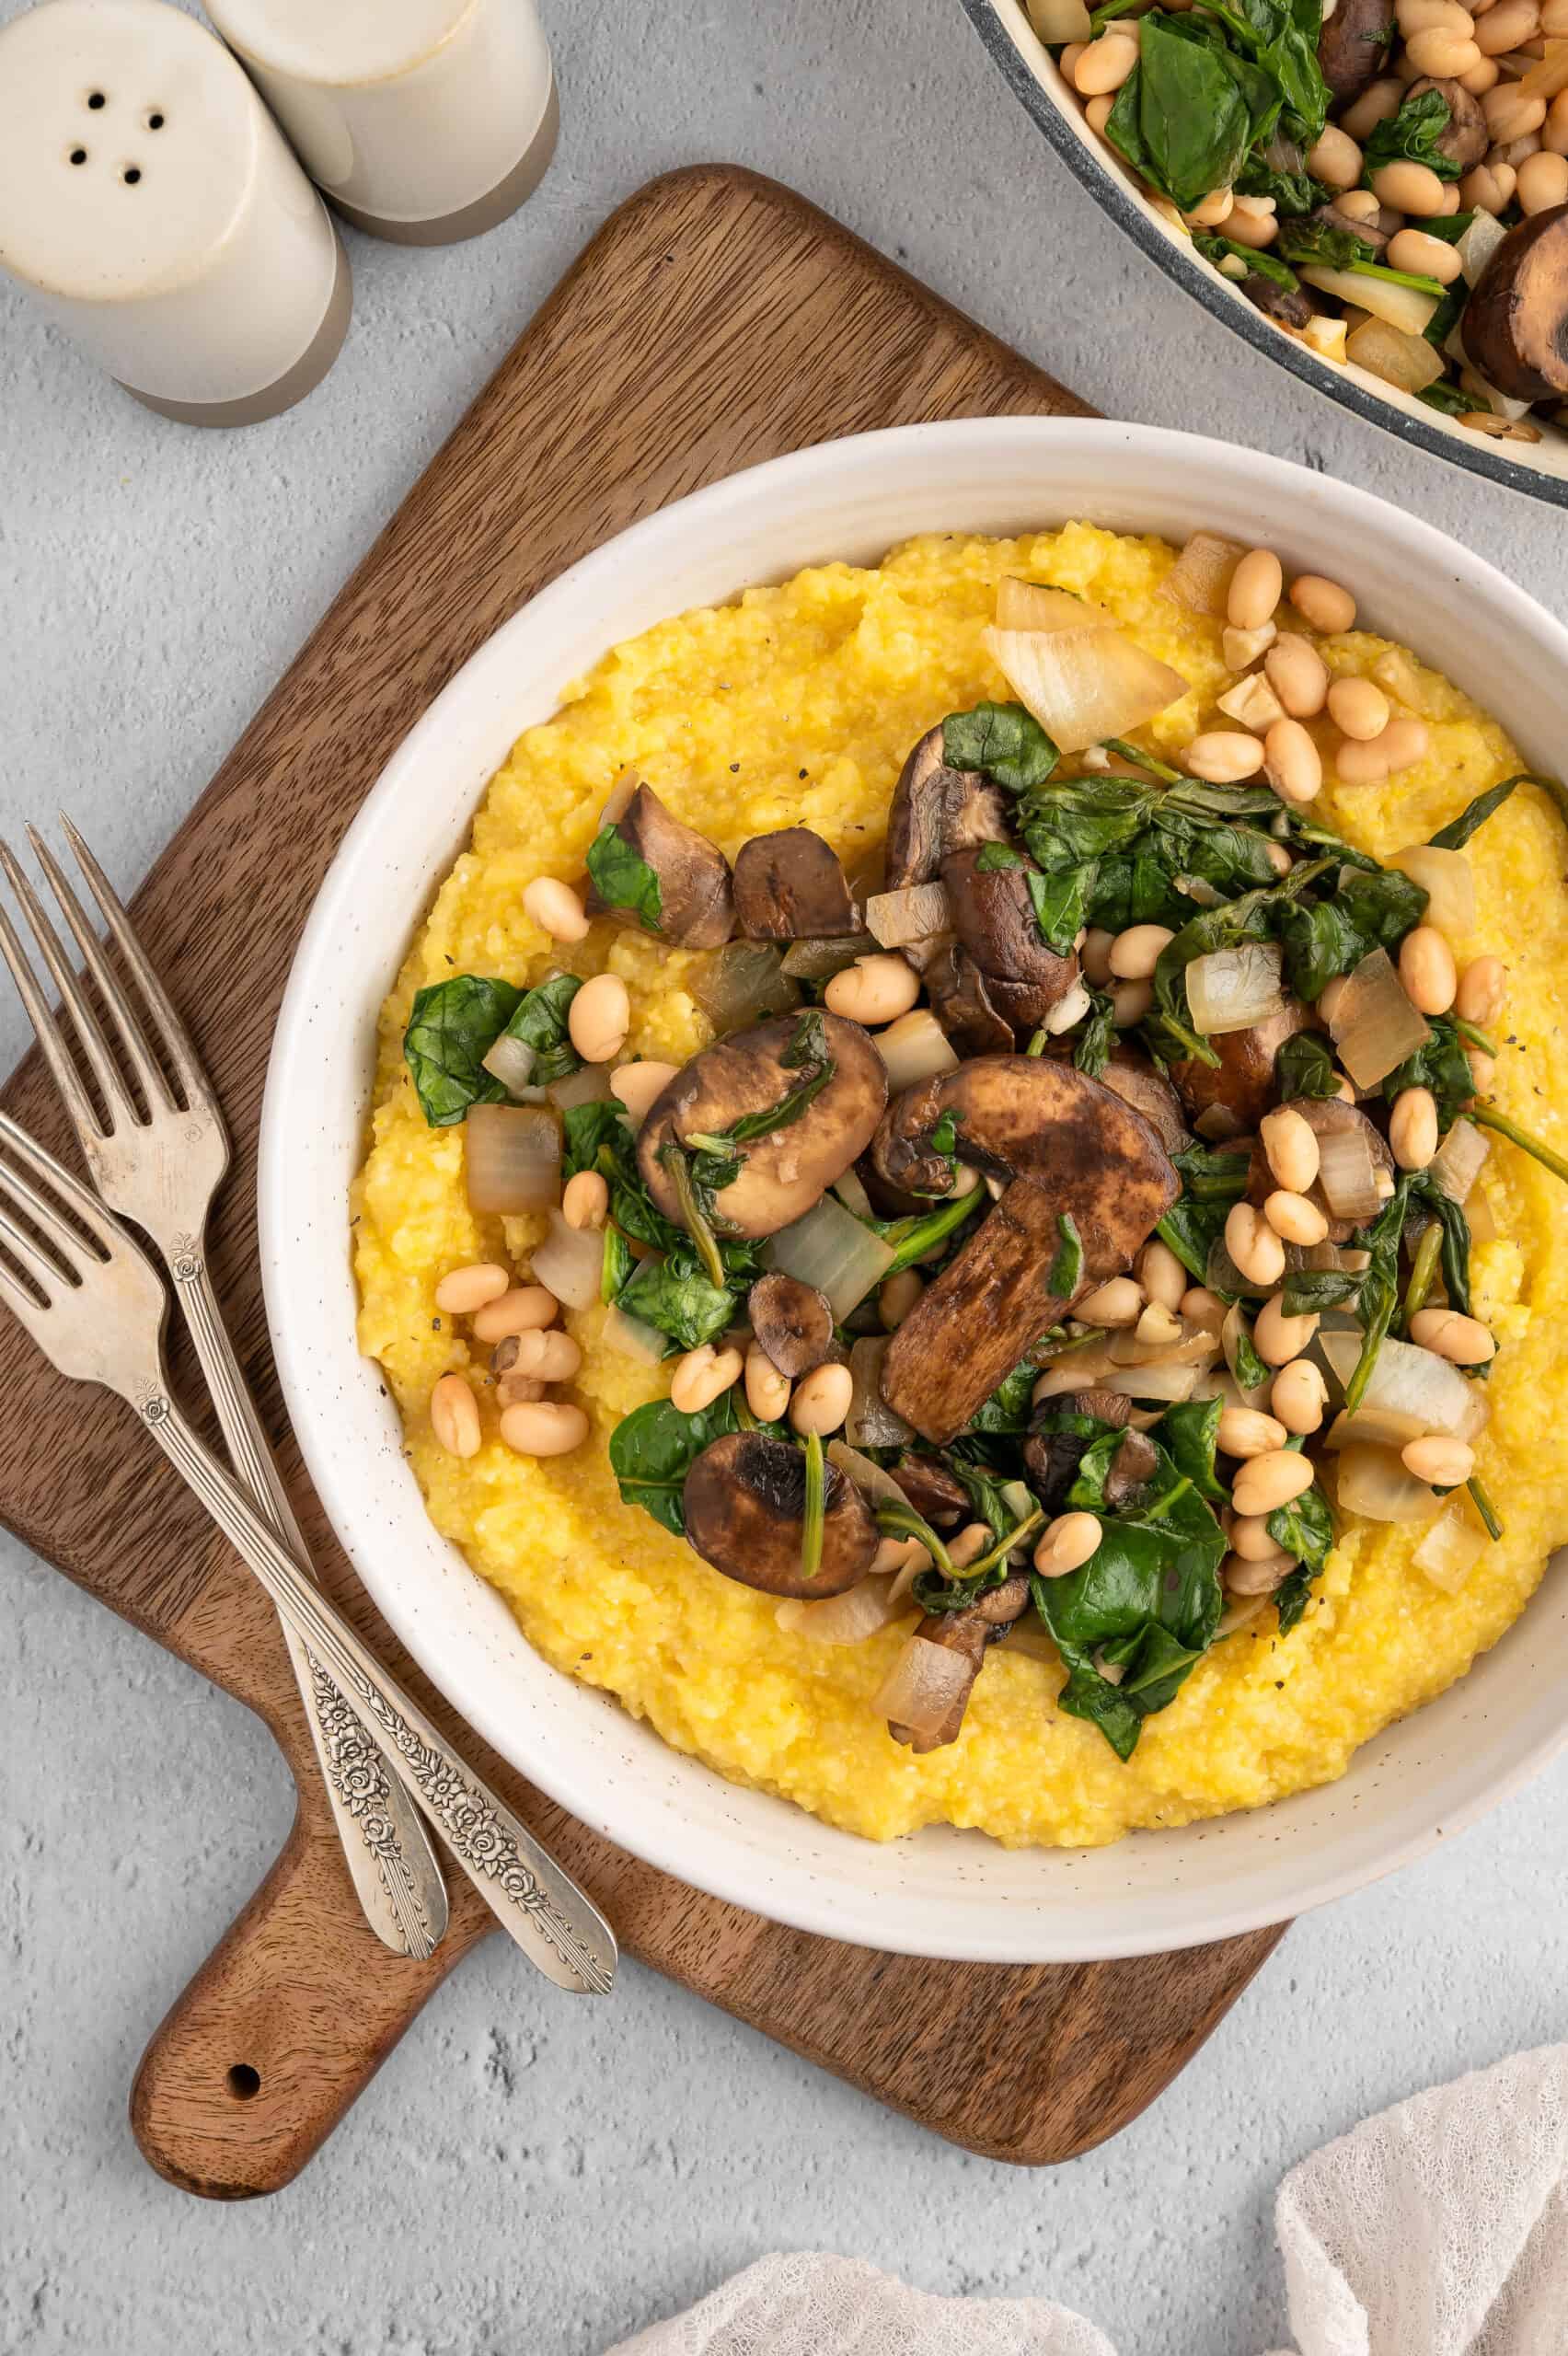 A bowl of vegan polenta and greens on a wooden board.